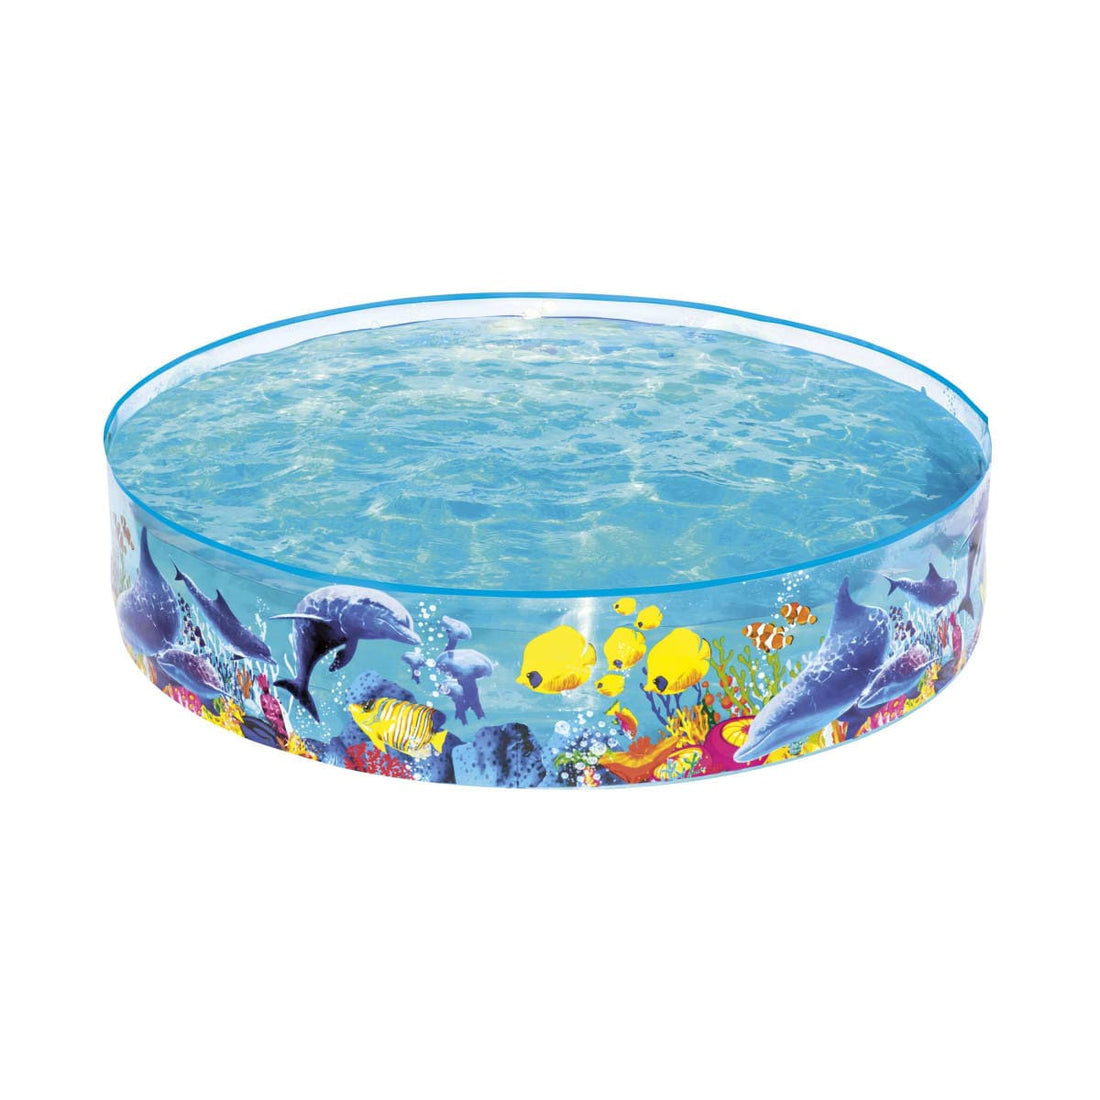 INFLATABLE POOL D.1.83 X38 H - best price from Maltashopper.com BR500012639